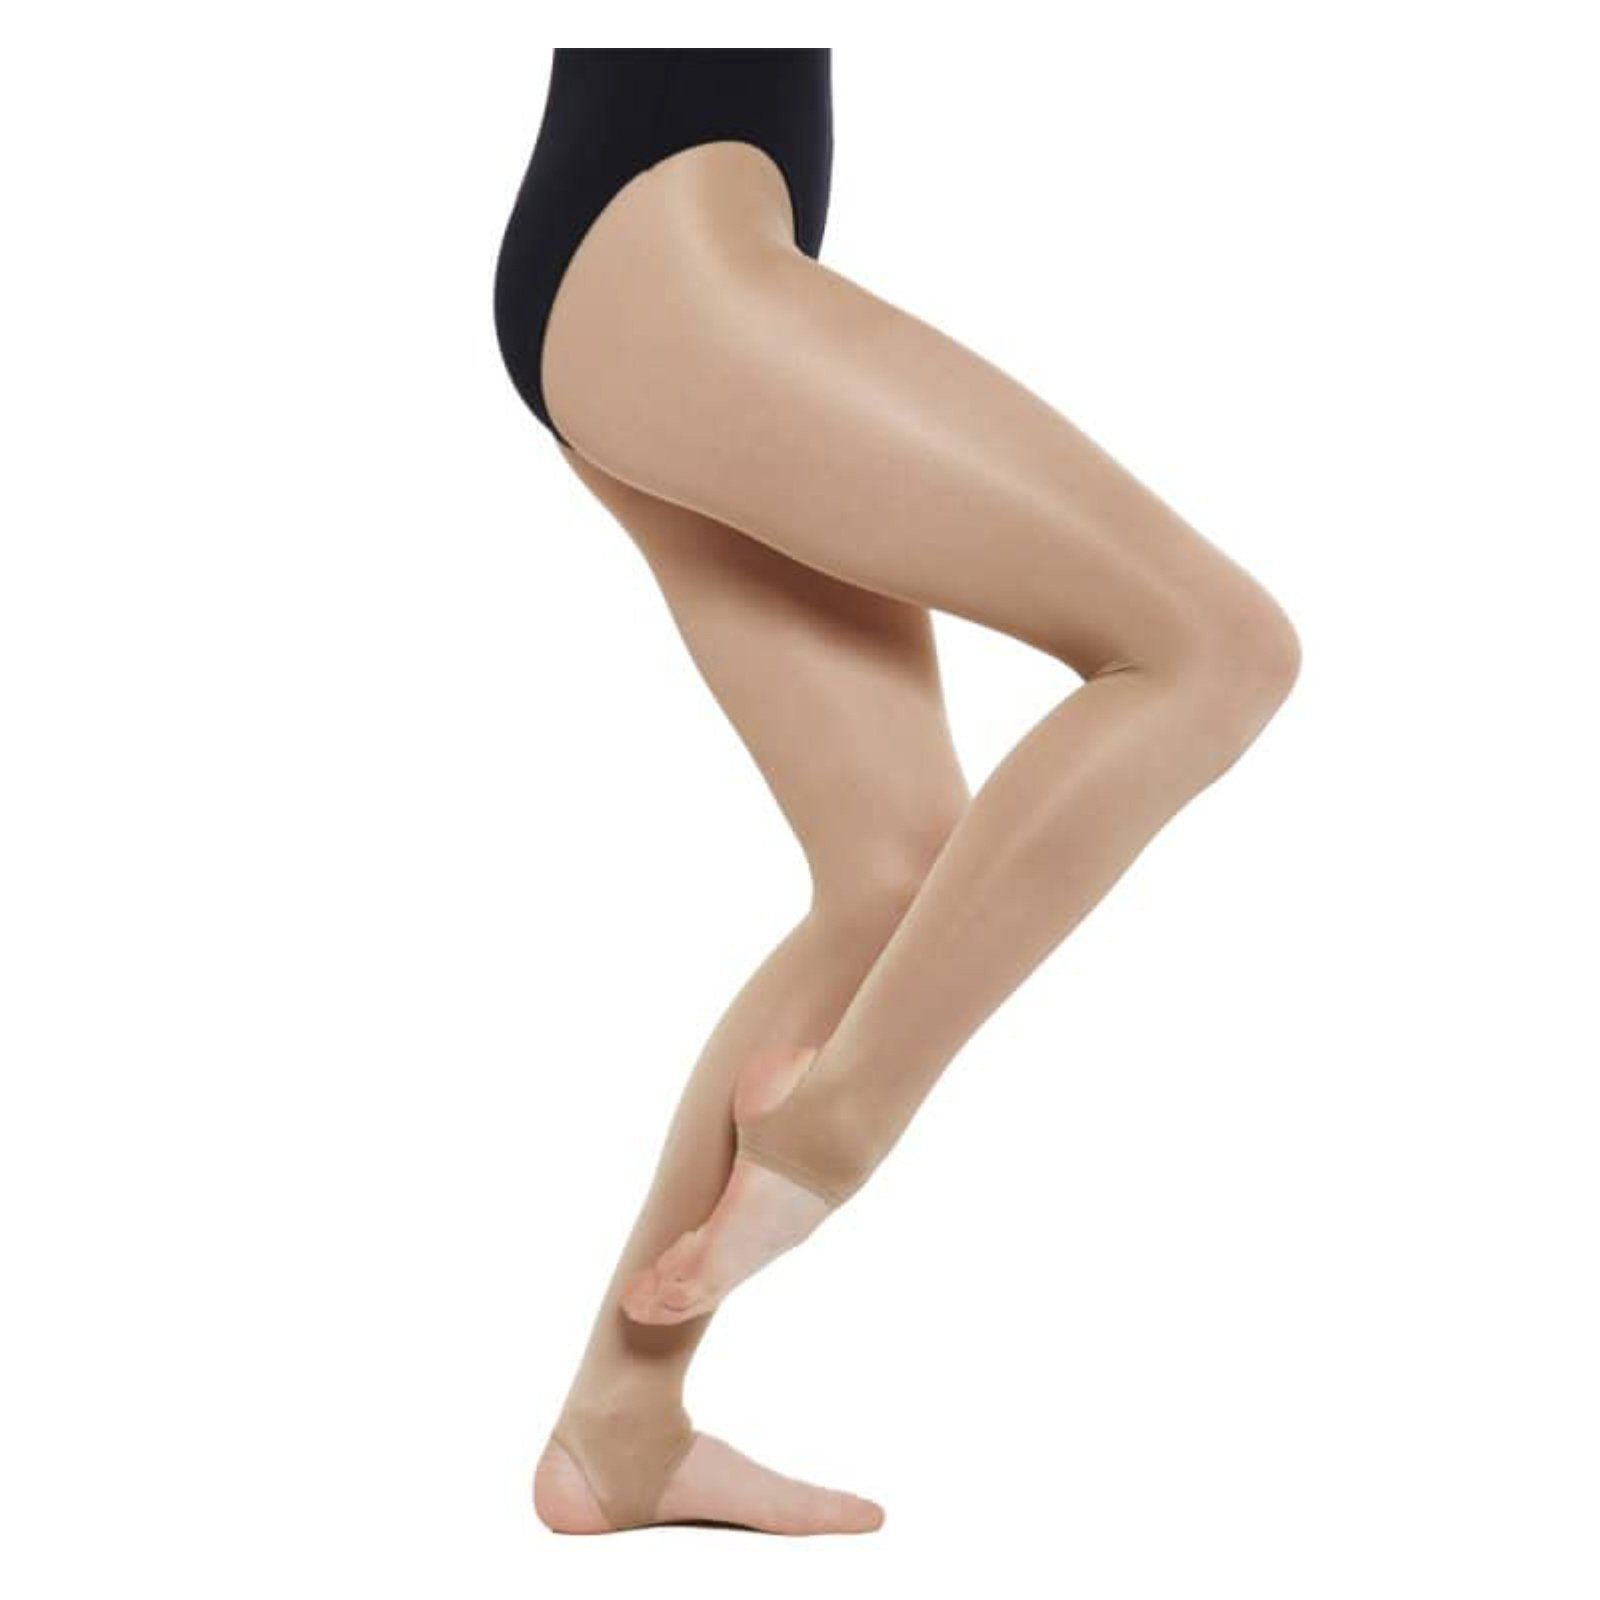 SILKY Dance Footless Jazz Tights 60 Denier Black Adult Sizes - Small